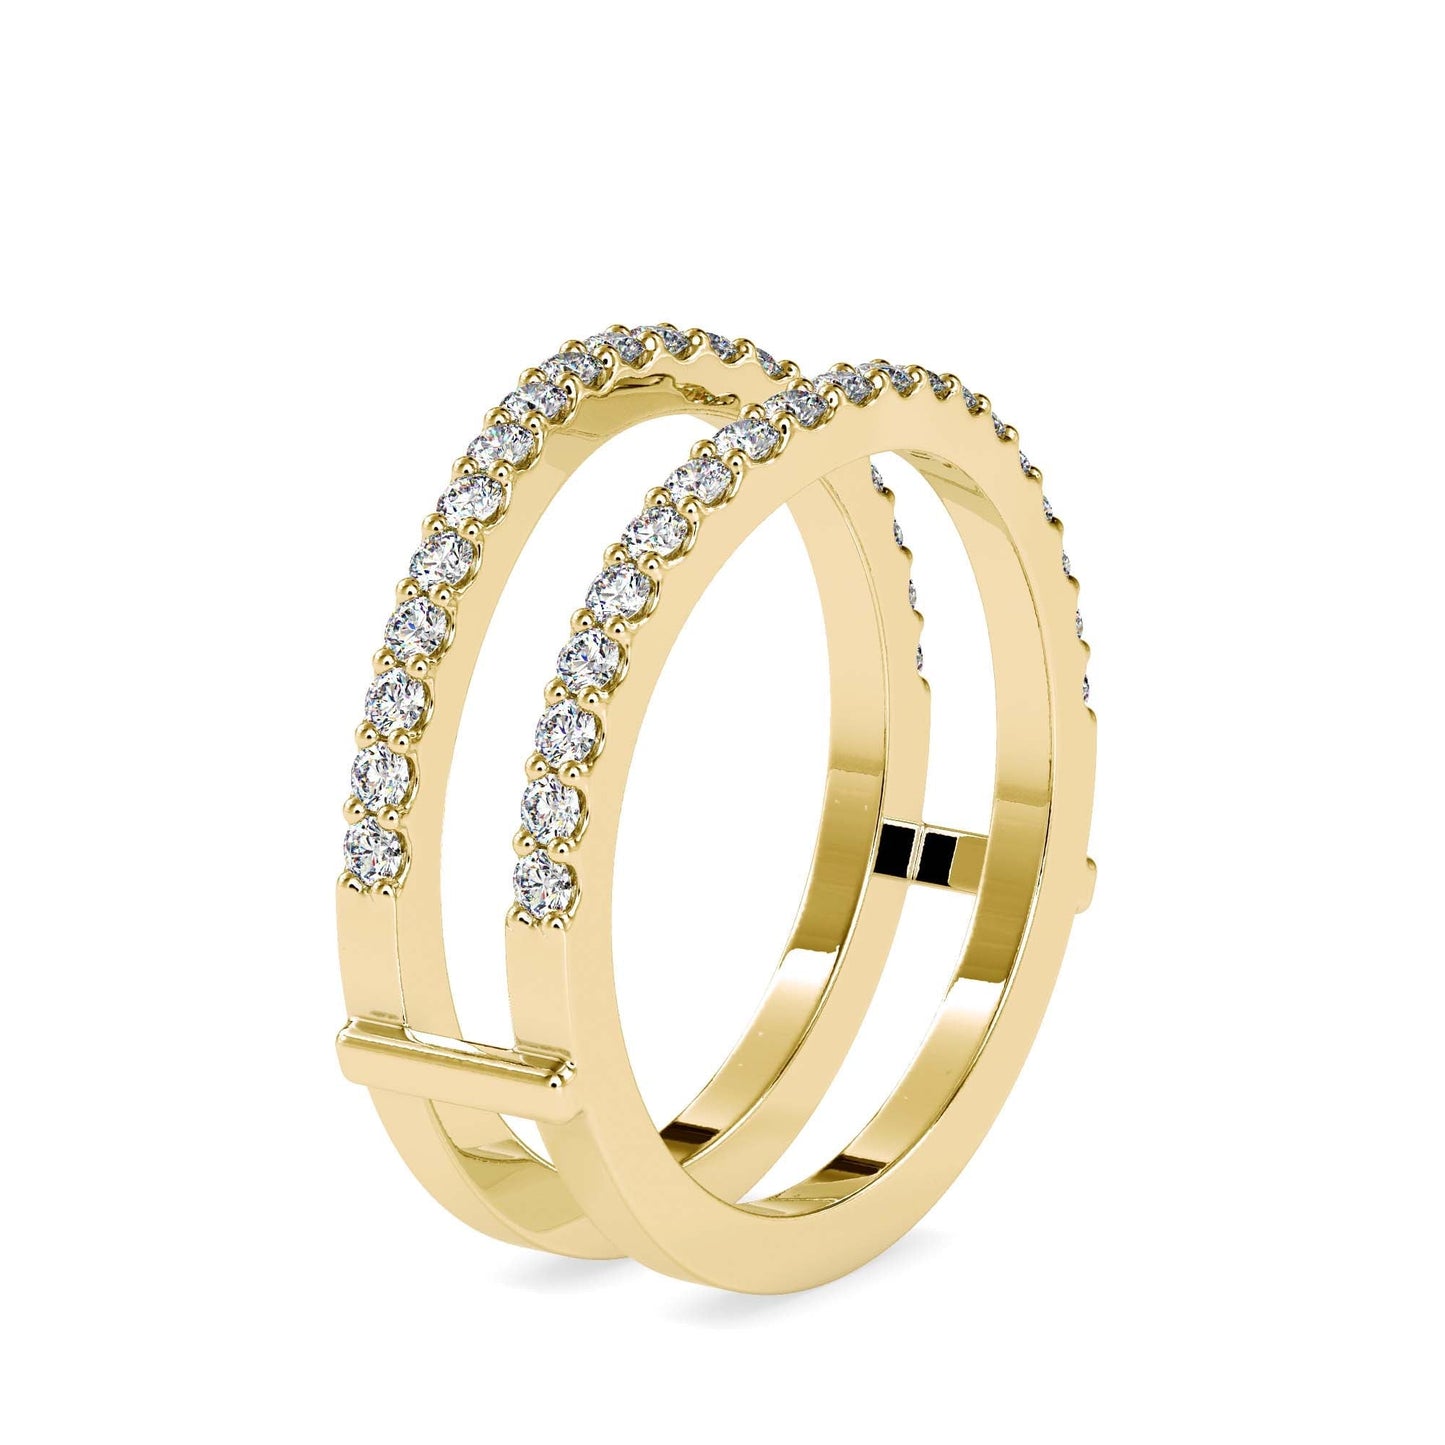 Delicate designer lab diamond ring in 18kt yellow gold by fiona diamonds